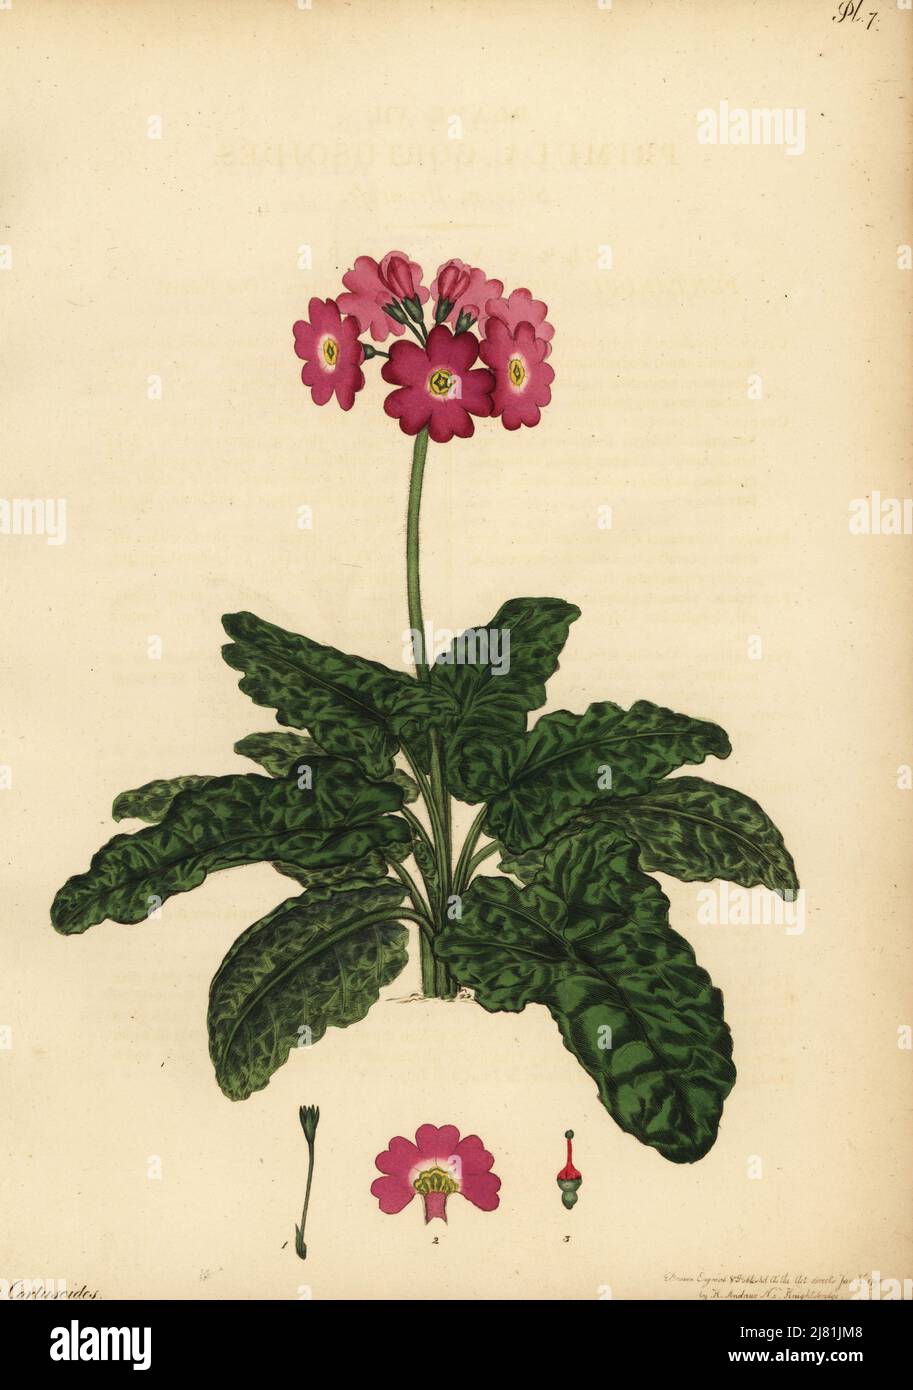 Siberian primrose, Primula cortusoides.Copperplate engraving drawn, engraved and hand-coloured by Henry Andrews from his Botanical Register, Volume 1, published in London, 1799. Stock Photo